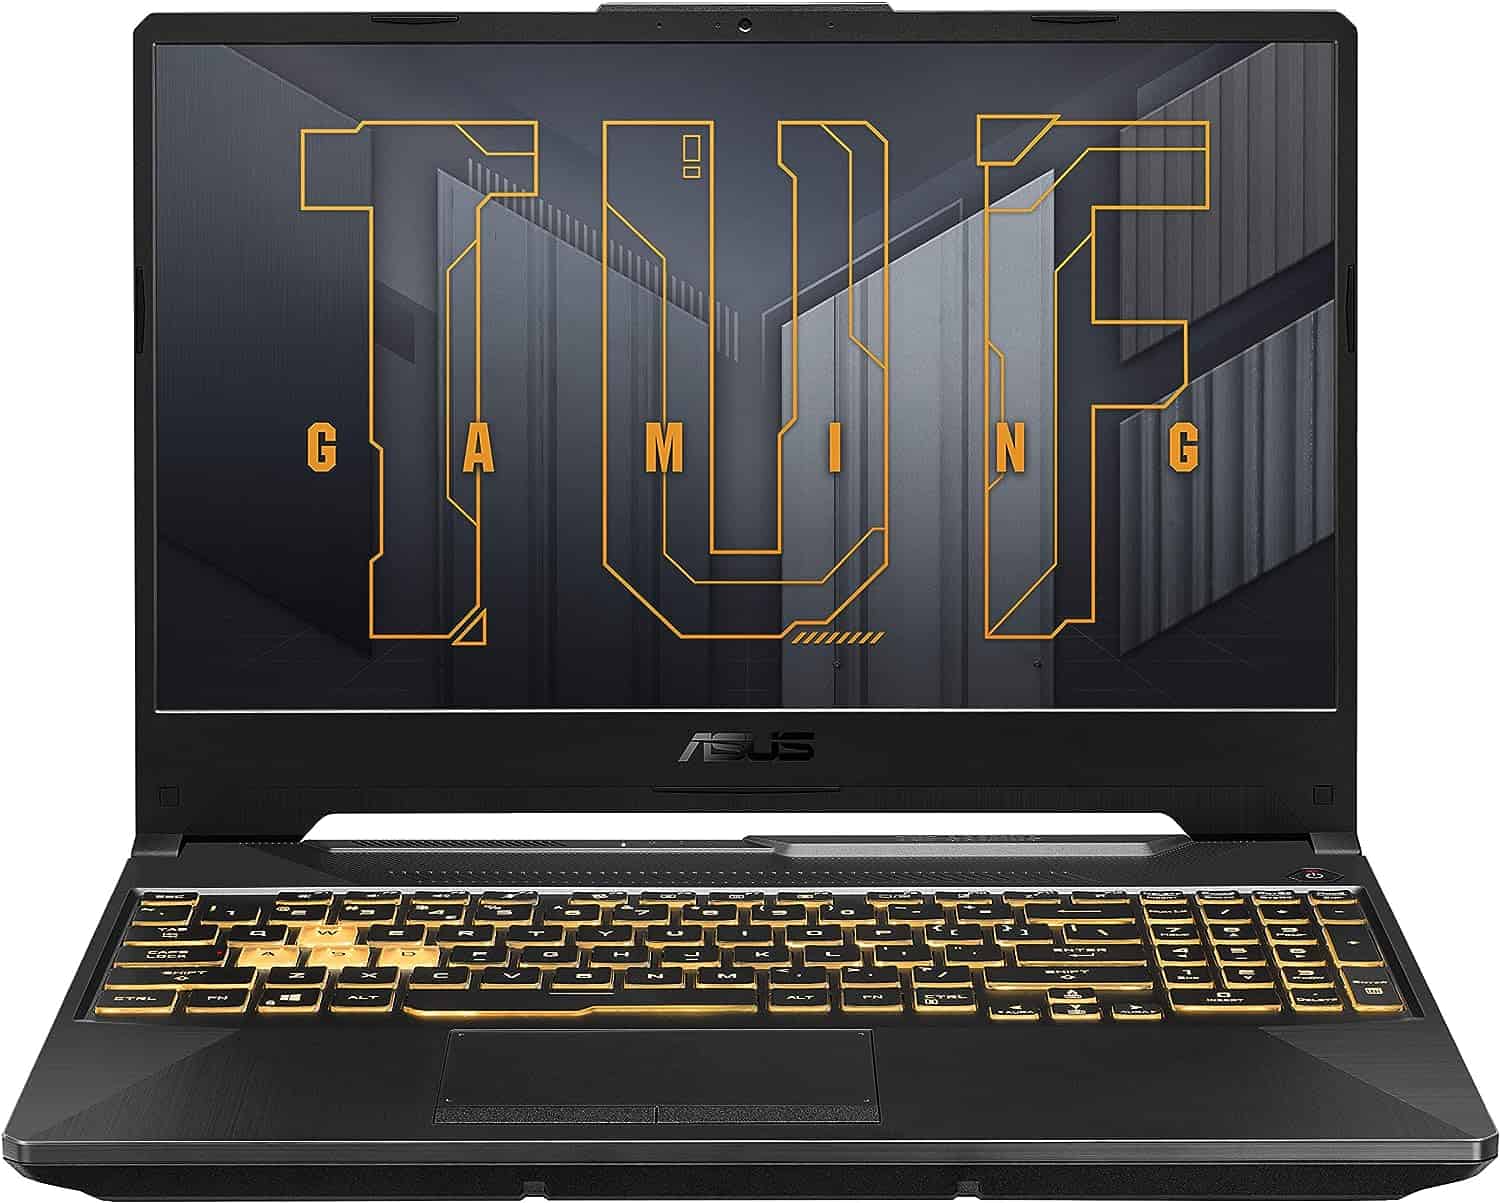 The ASUS TUF Gaming F15 laptop features a gold logo.